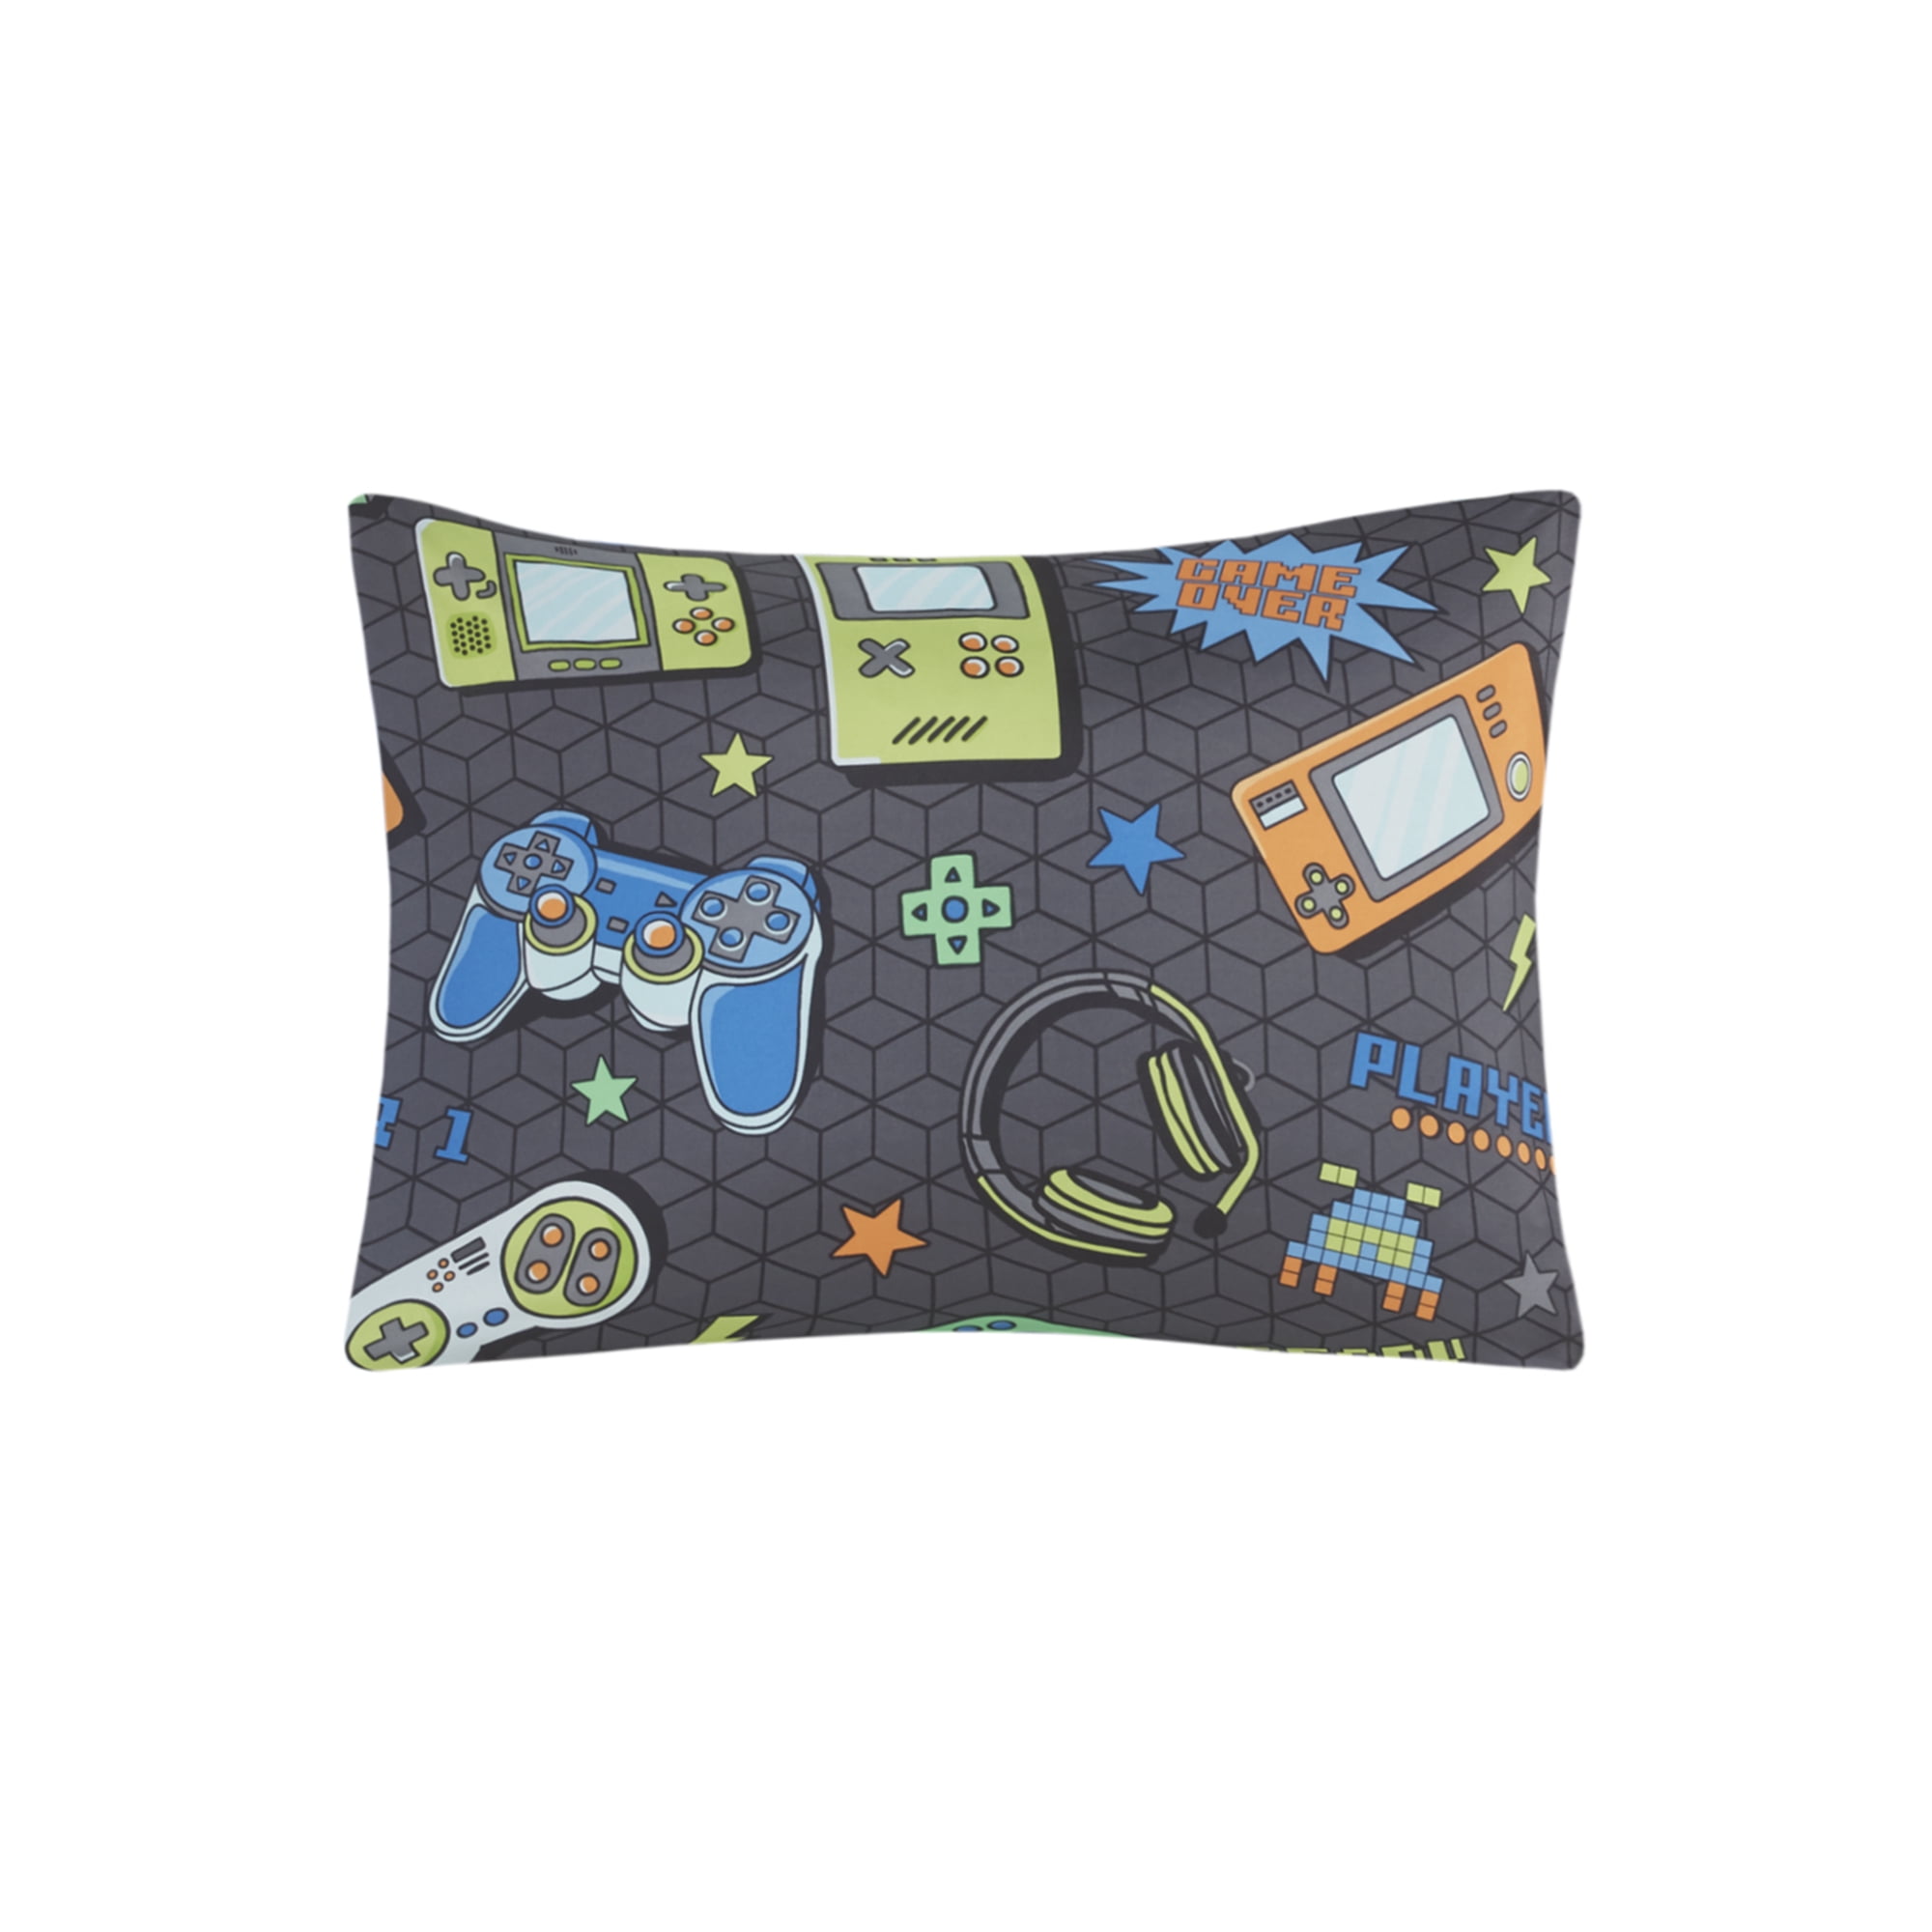 If You Dug The Gaming Bed, Check Out The Gaming Cushion